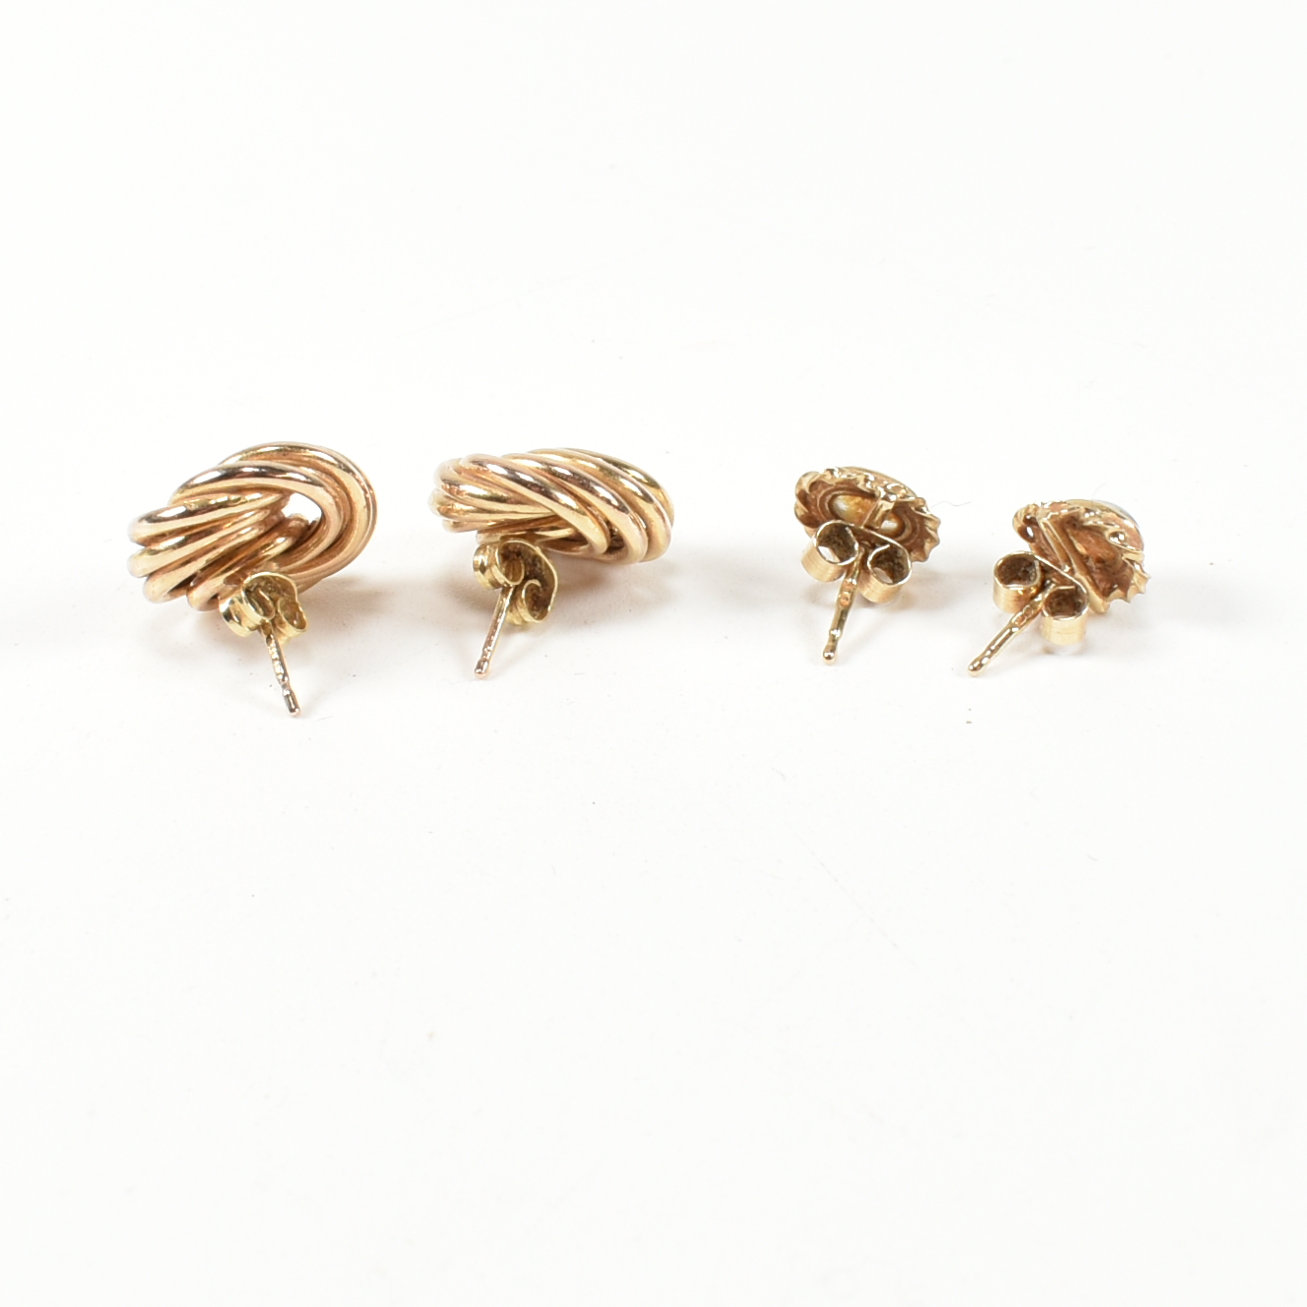 TWO PAIRS OF HALLMARKED 9CT GOLD EARRINGS - Image 2 of 6